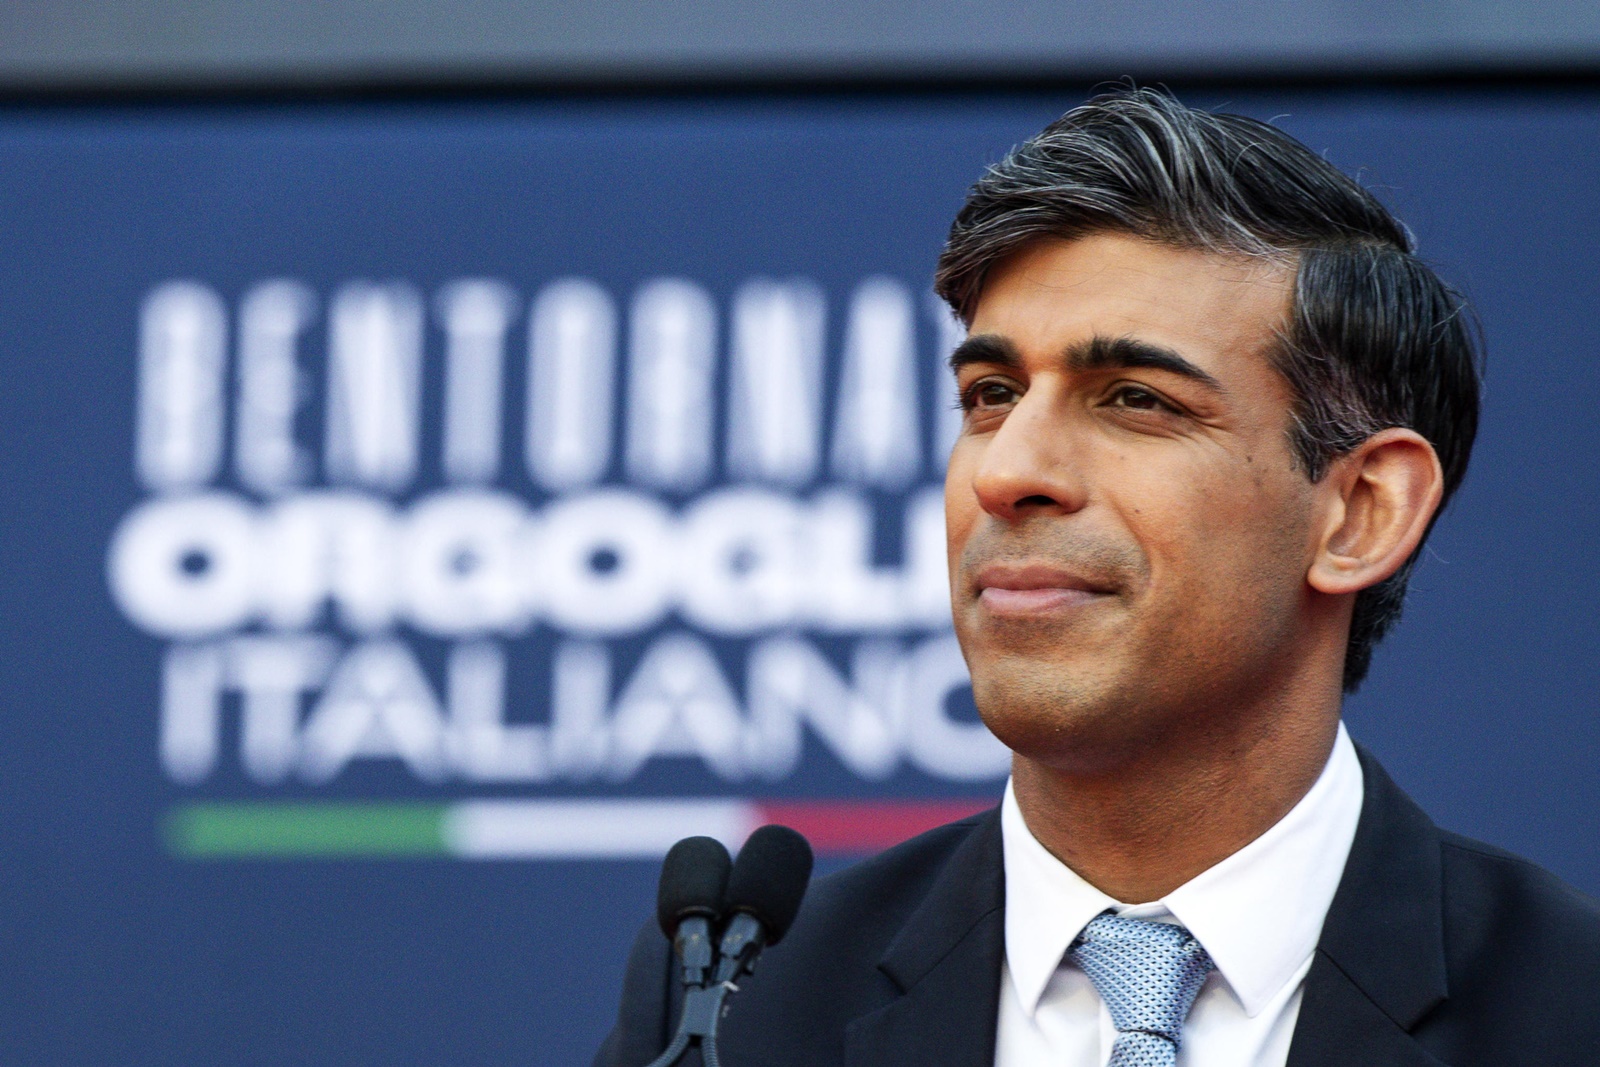 epa11032544 British Prime Minister Rishi Sunak speaks during the Atreju 2023 political festival in the gardens of Castel Sant'Angelo in Rome, Italy, 16 December 2023. The Atreju political festival in Rome was organized by Italian Prime Minister Meloni and her right-wing party, Brothers of Italy. The theme of this year's edition is 'Welcome Back Italian Pride' (Bentornato orgoglio italiano).  EPA/ANGELO CARCONI